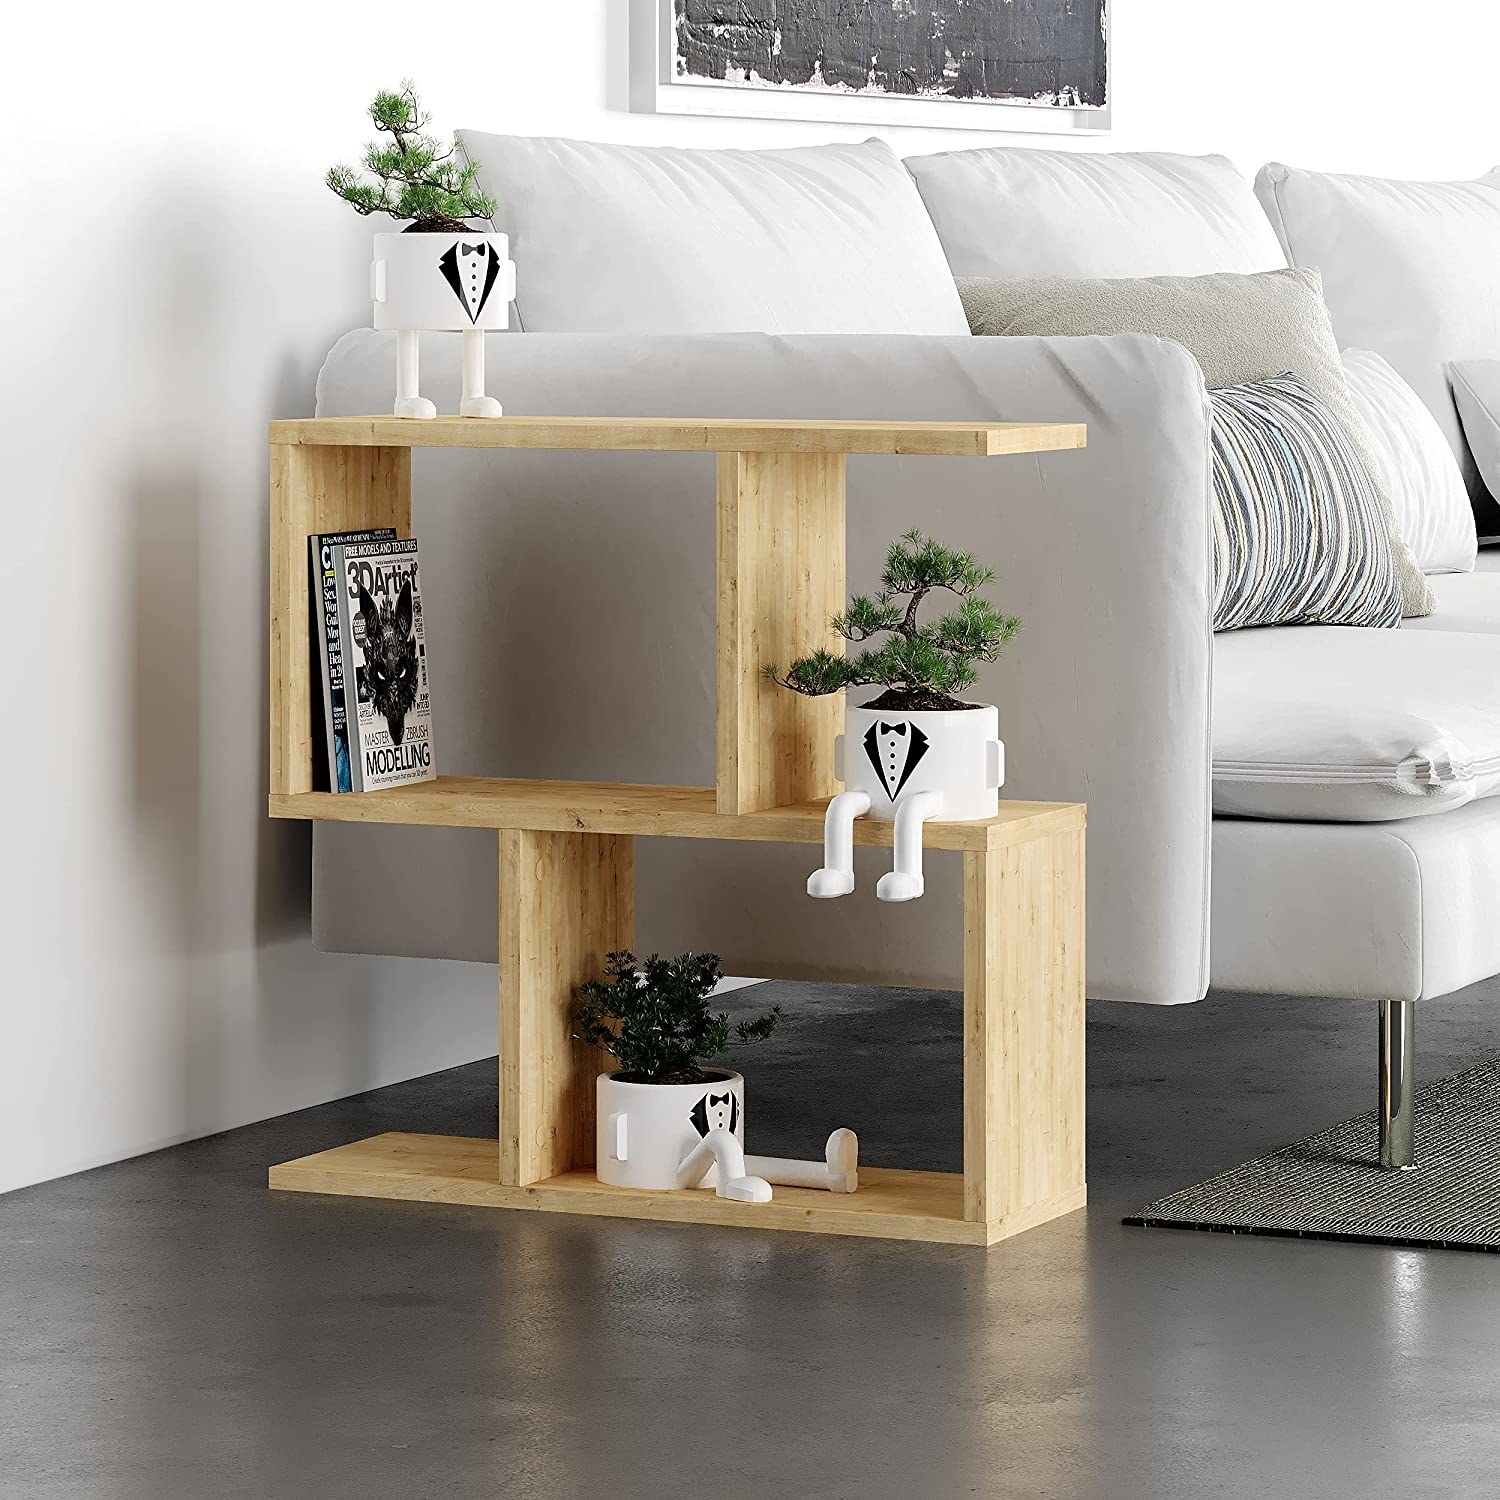 a petite side table in an irregular shape next to a sofa